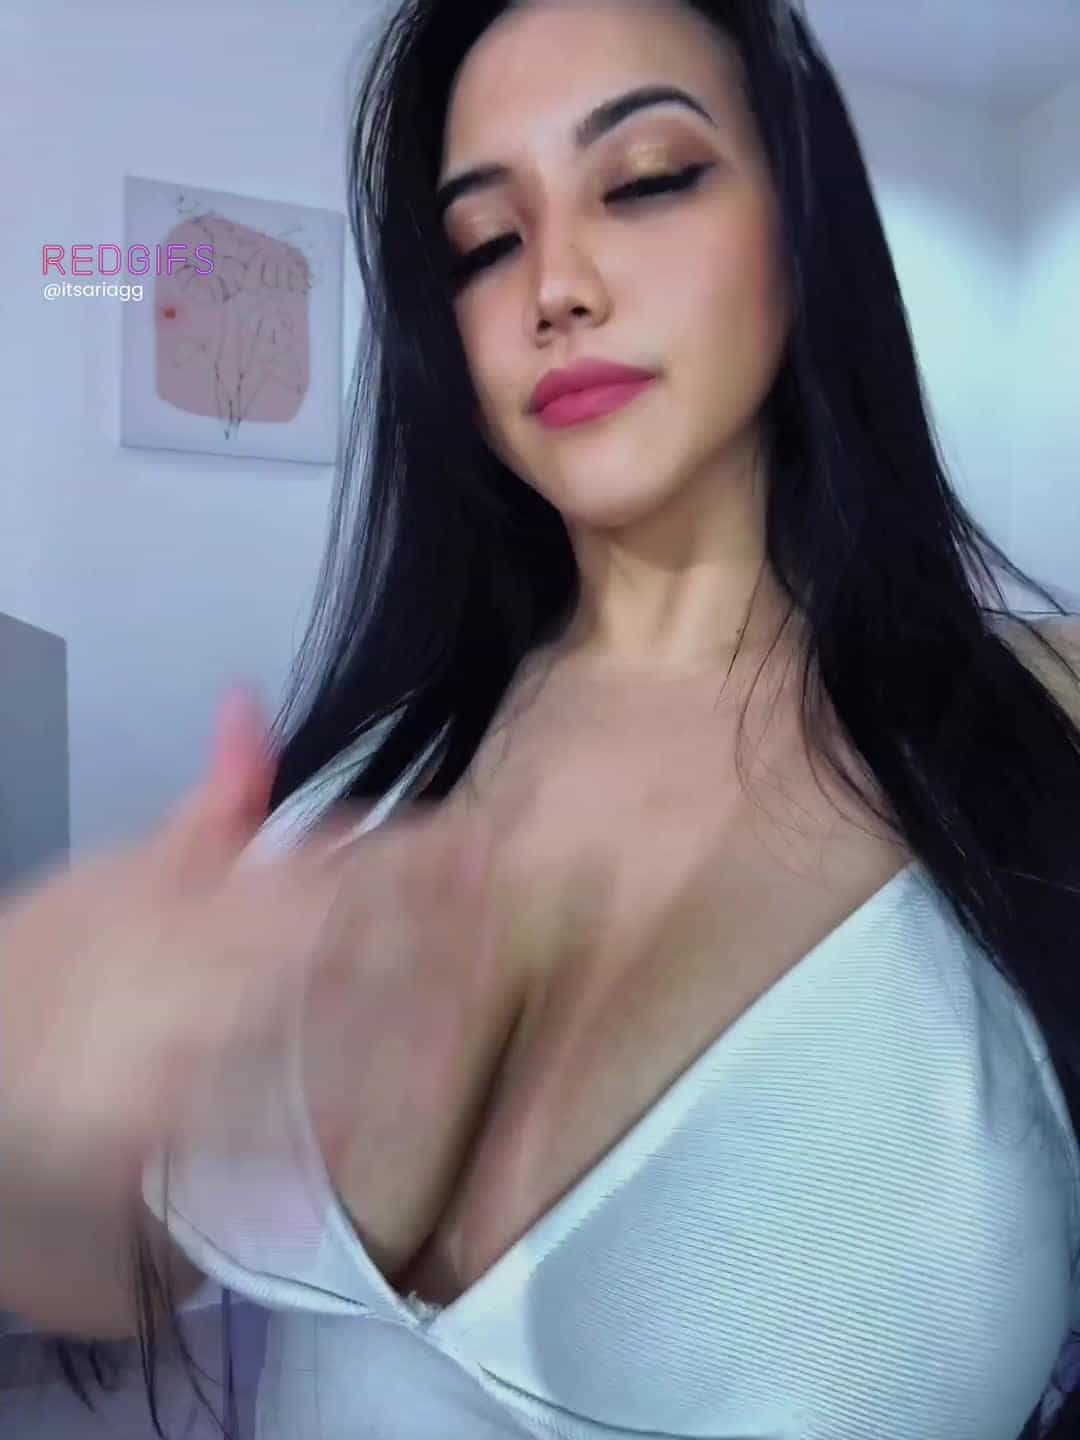 Your best friend finally decides to show you her huge natural tits, what’s your response? [drop]